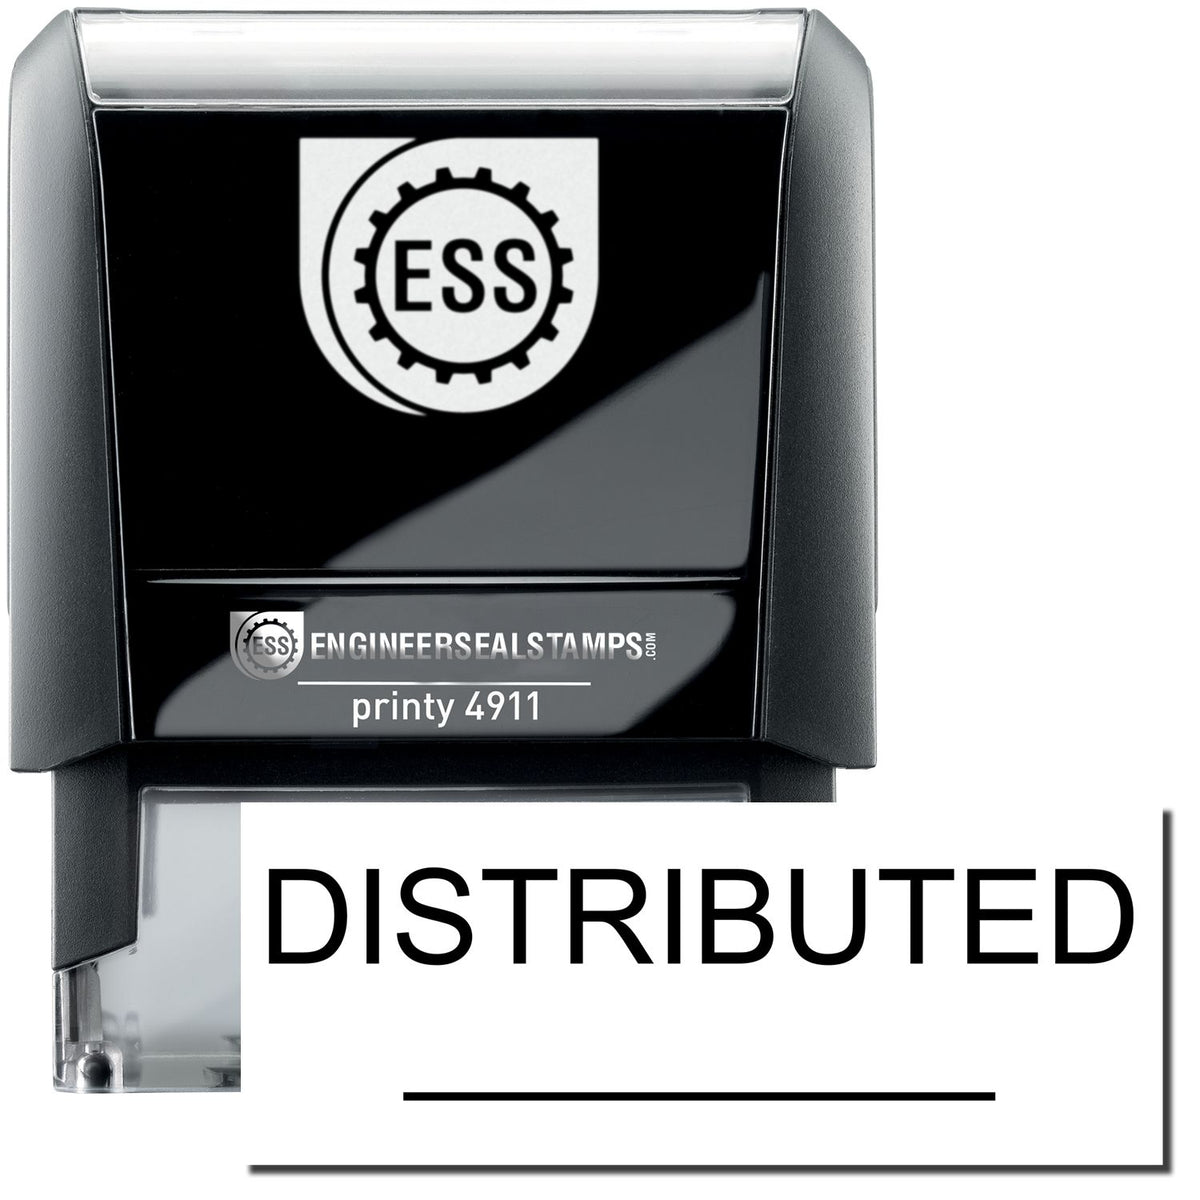 A self-inking stamp with a stamped image showing how the text &quot;DISTRIBUTED&quot; with a line under it is displayed after stamping.